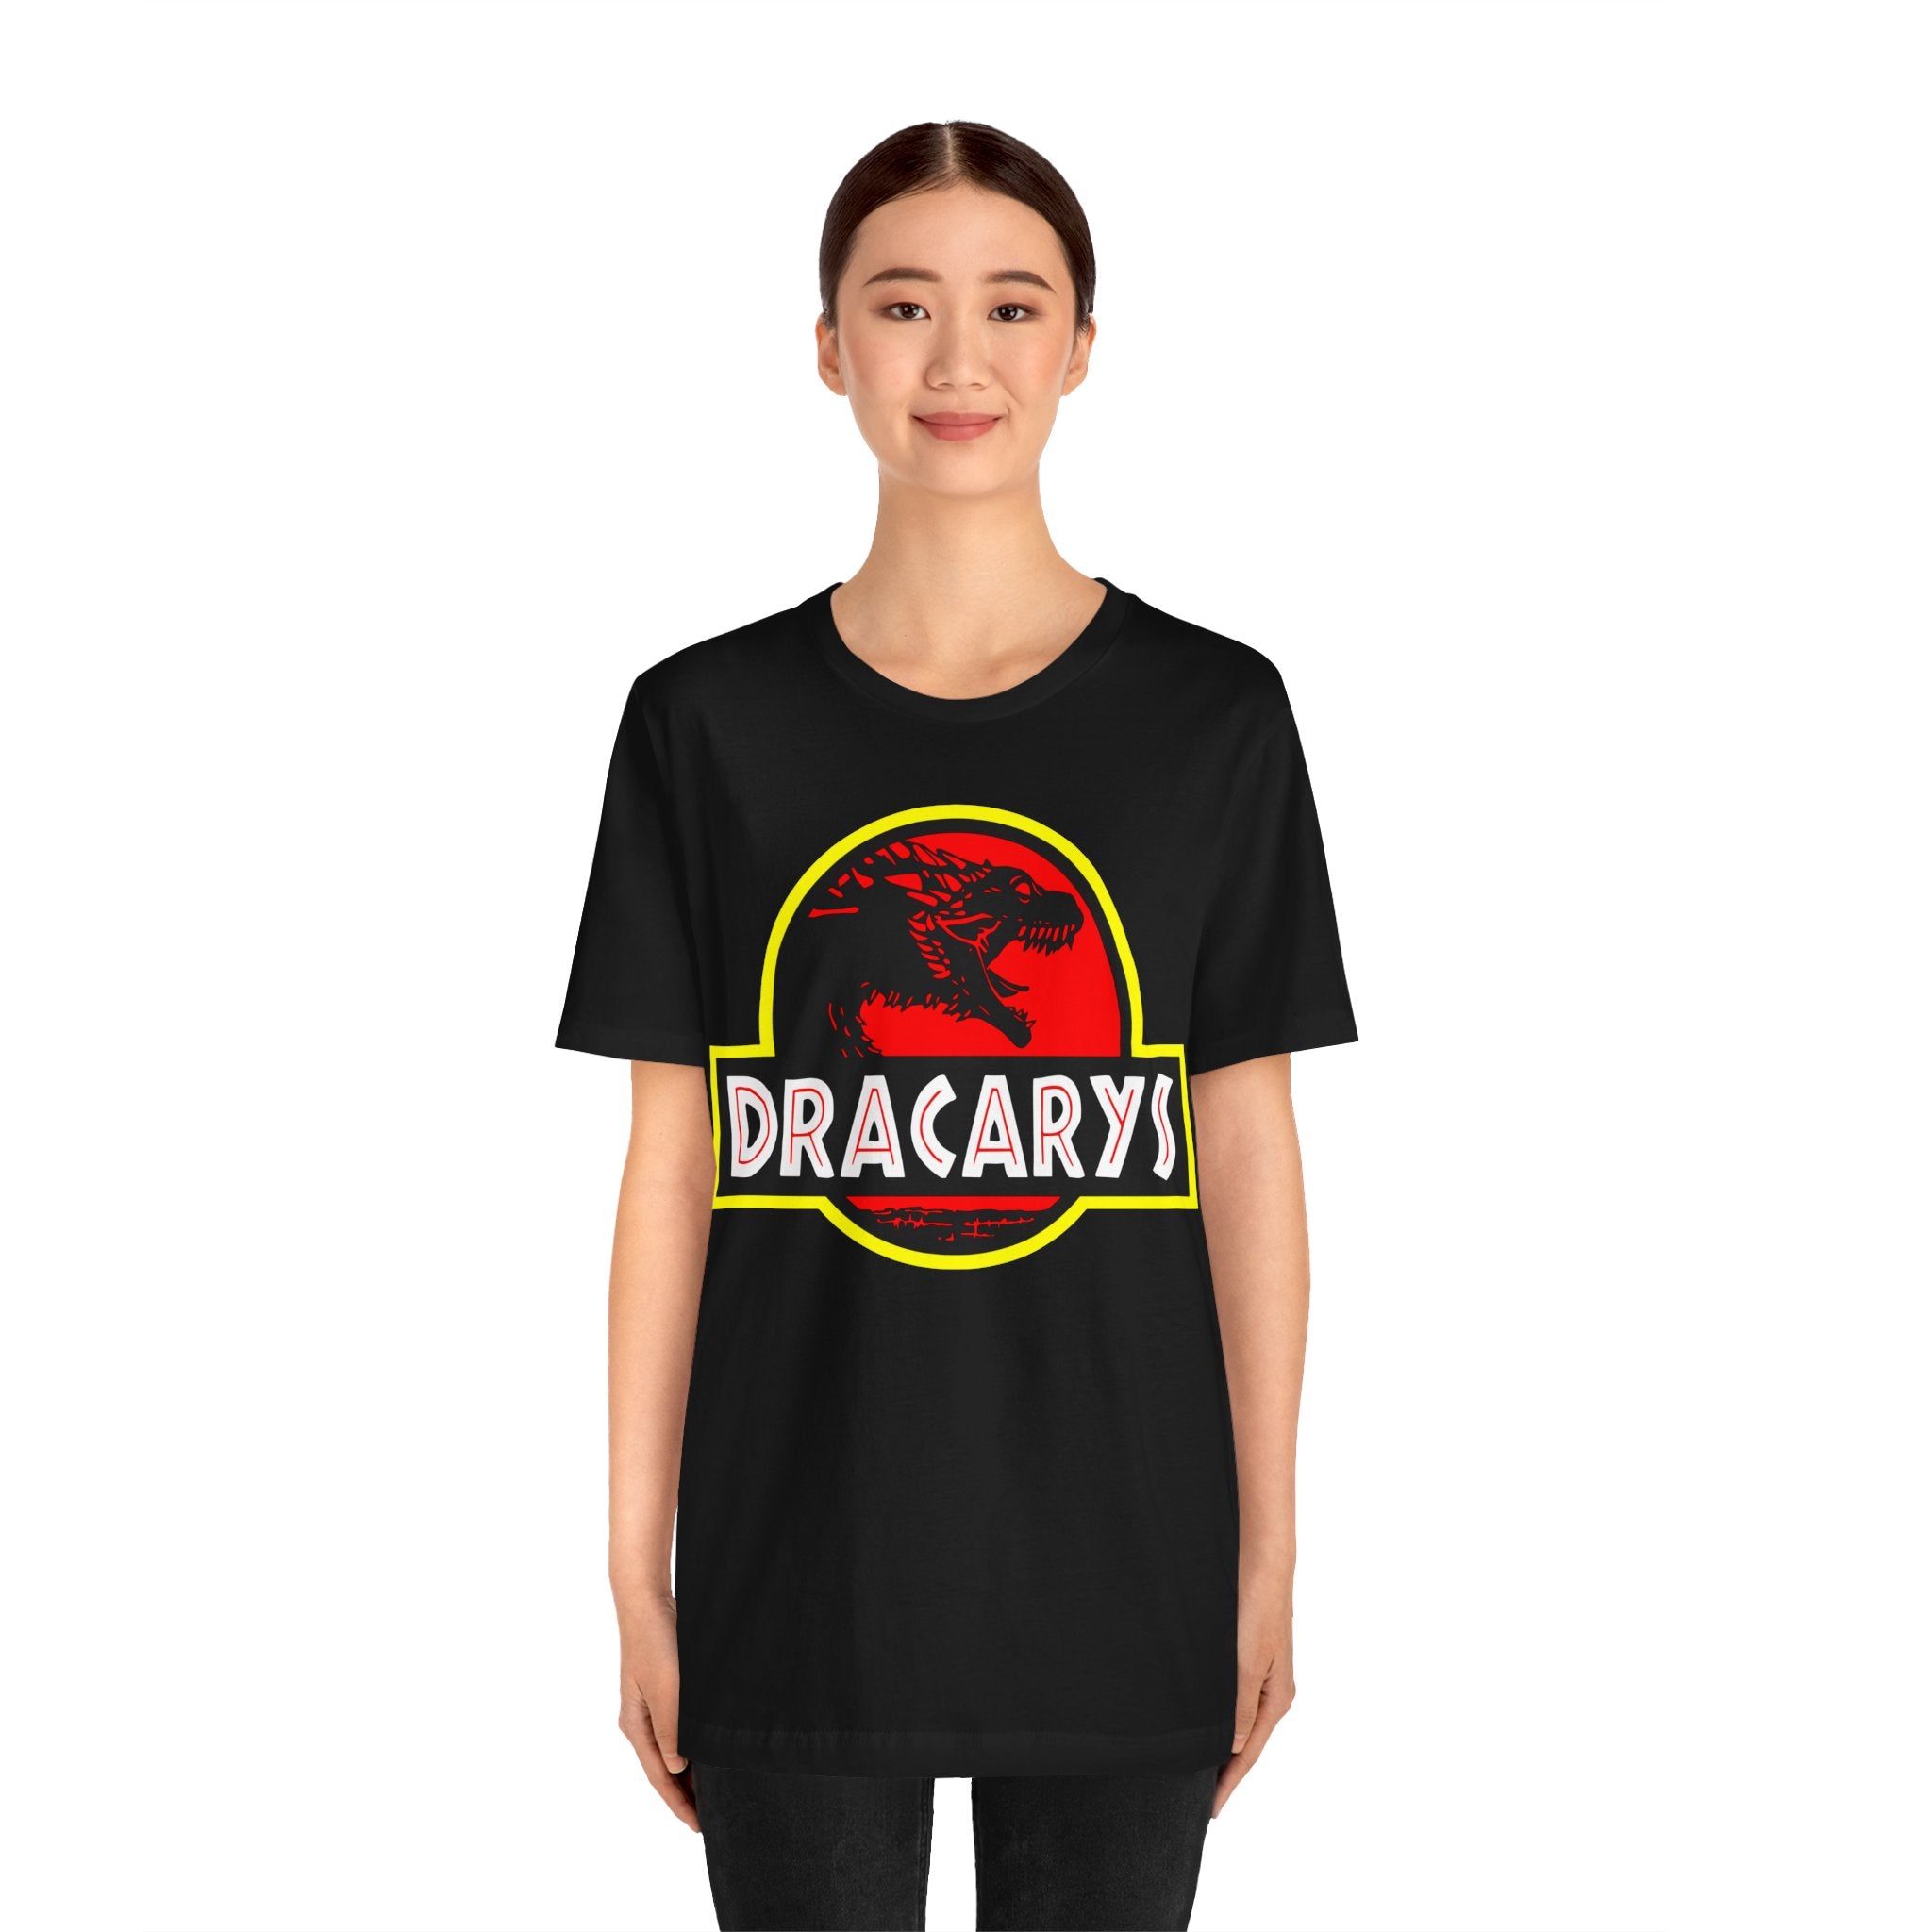 A young woman wearing a black classic Dracarys T-shirt with a red and yellow "Dracarys" logo featuring a quality print of a dragon silhouette.